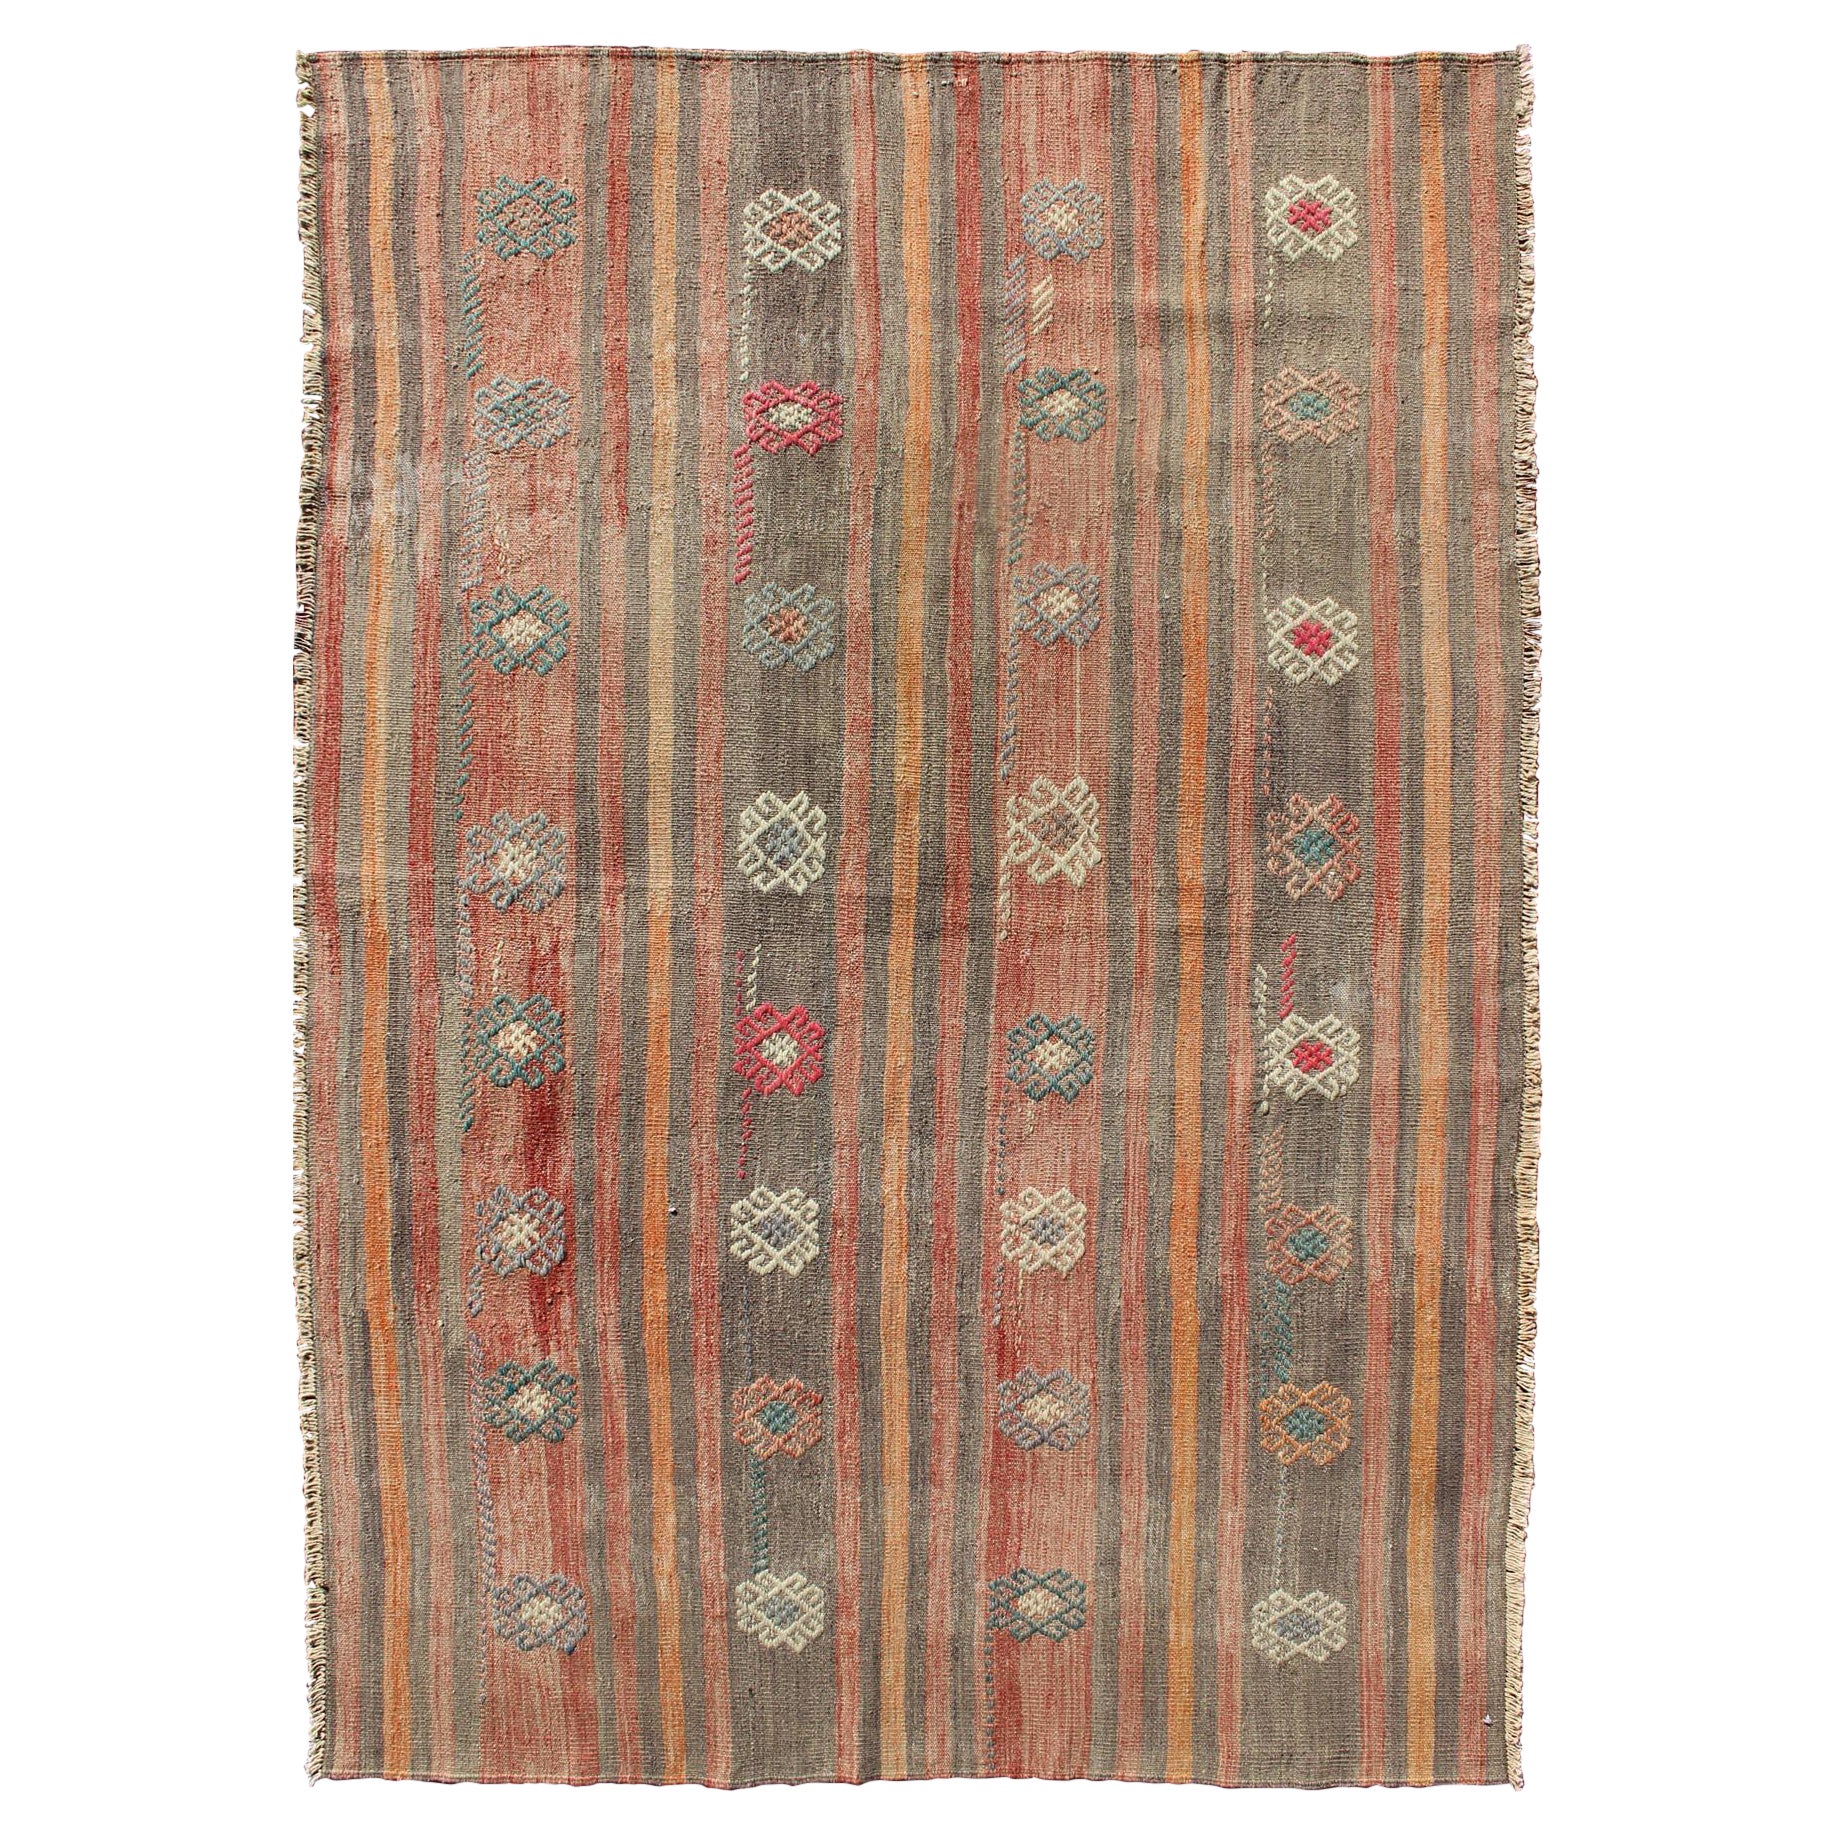 Colorful Vintage Turkish Flat-Weave Kilim Rug with Striped Geometric Design For Sale